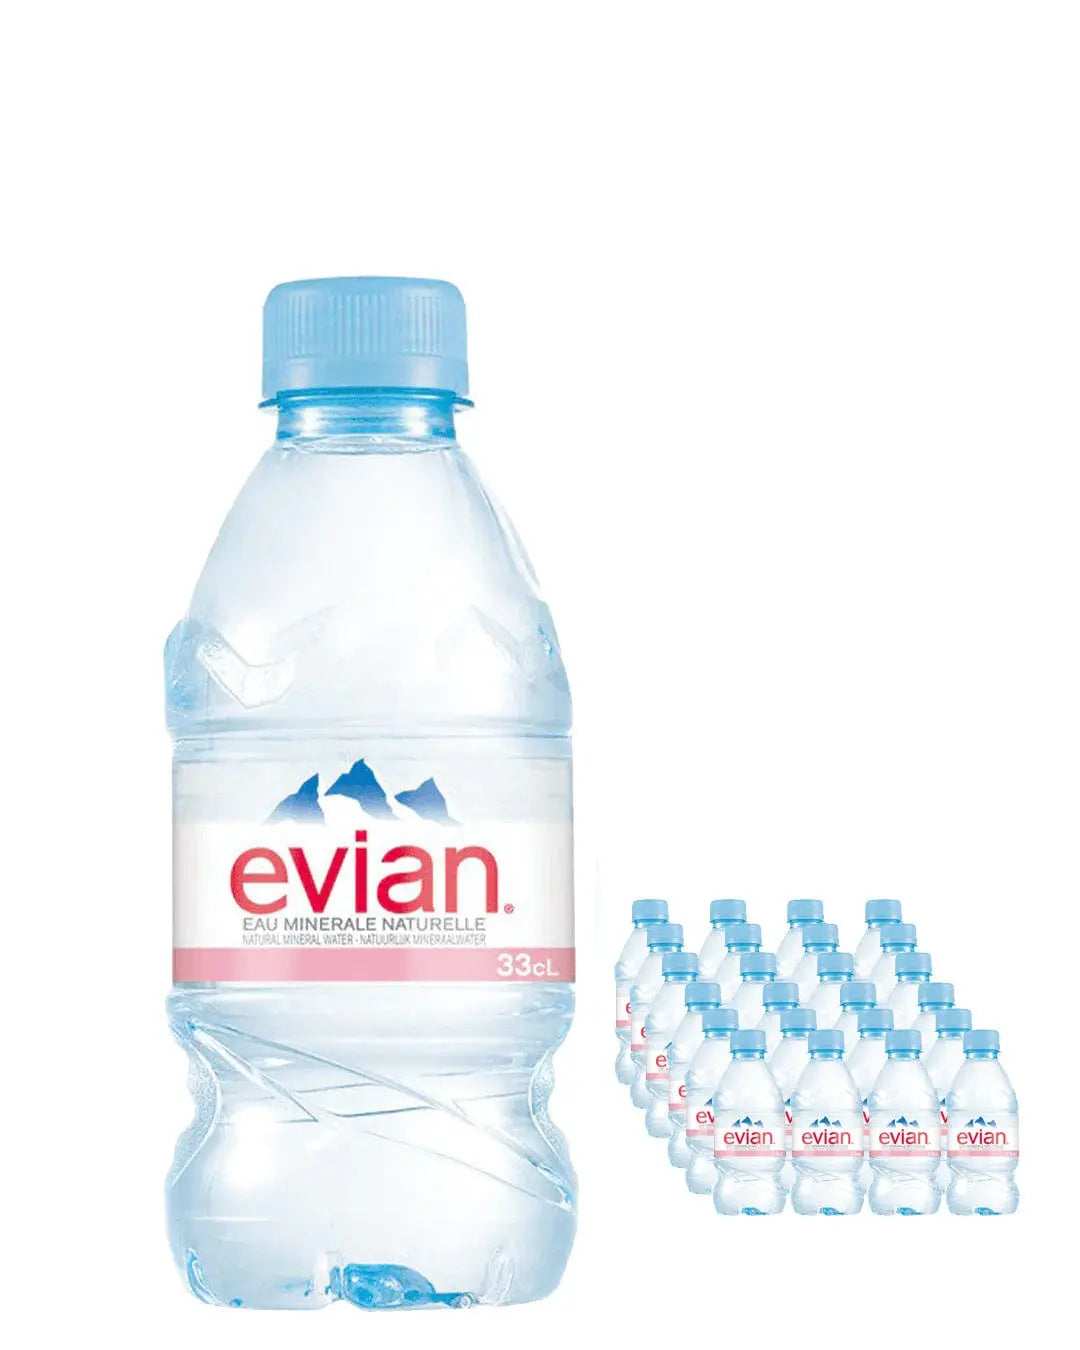 Evian's game changing multipack